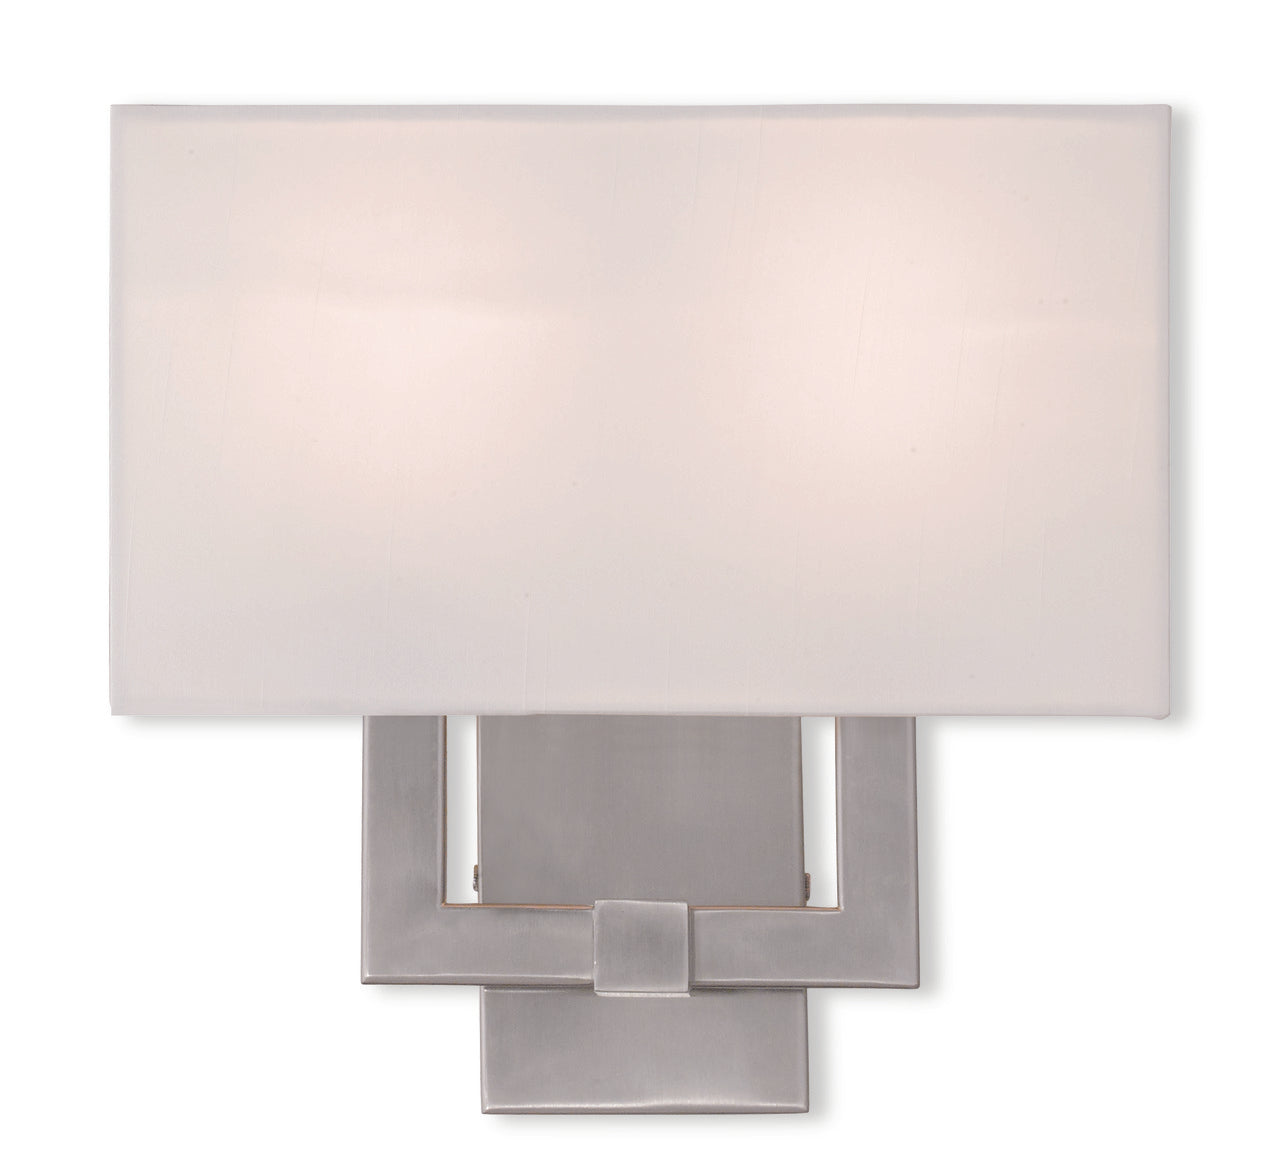 LIVEX Lighting 51103-91 Hollborn Contemporary Wall Sconce in Brushed Nickel (2 Light)